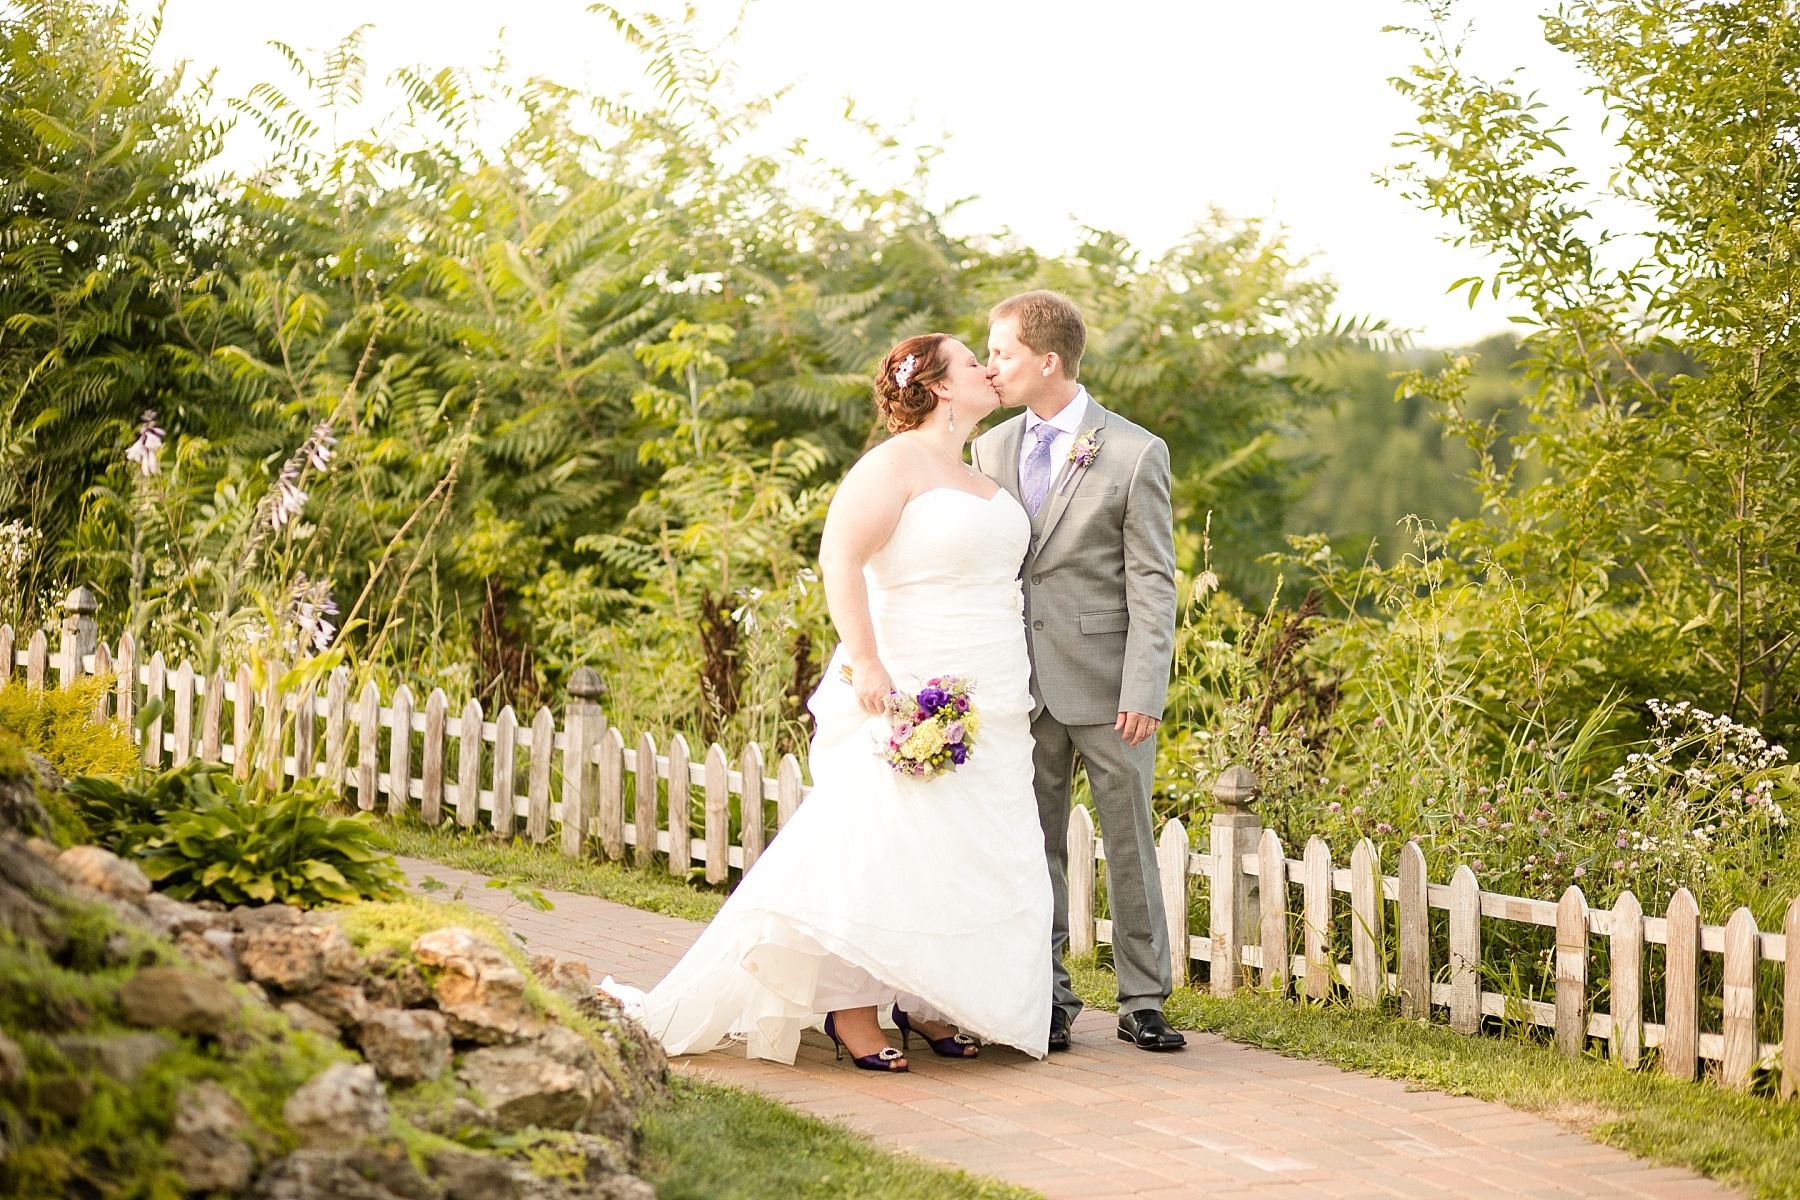 A sunny midwest day made for the perfect day to say I Do at Cottage Winery and Vineyard wedding.